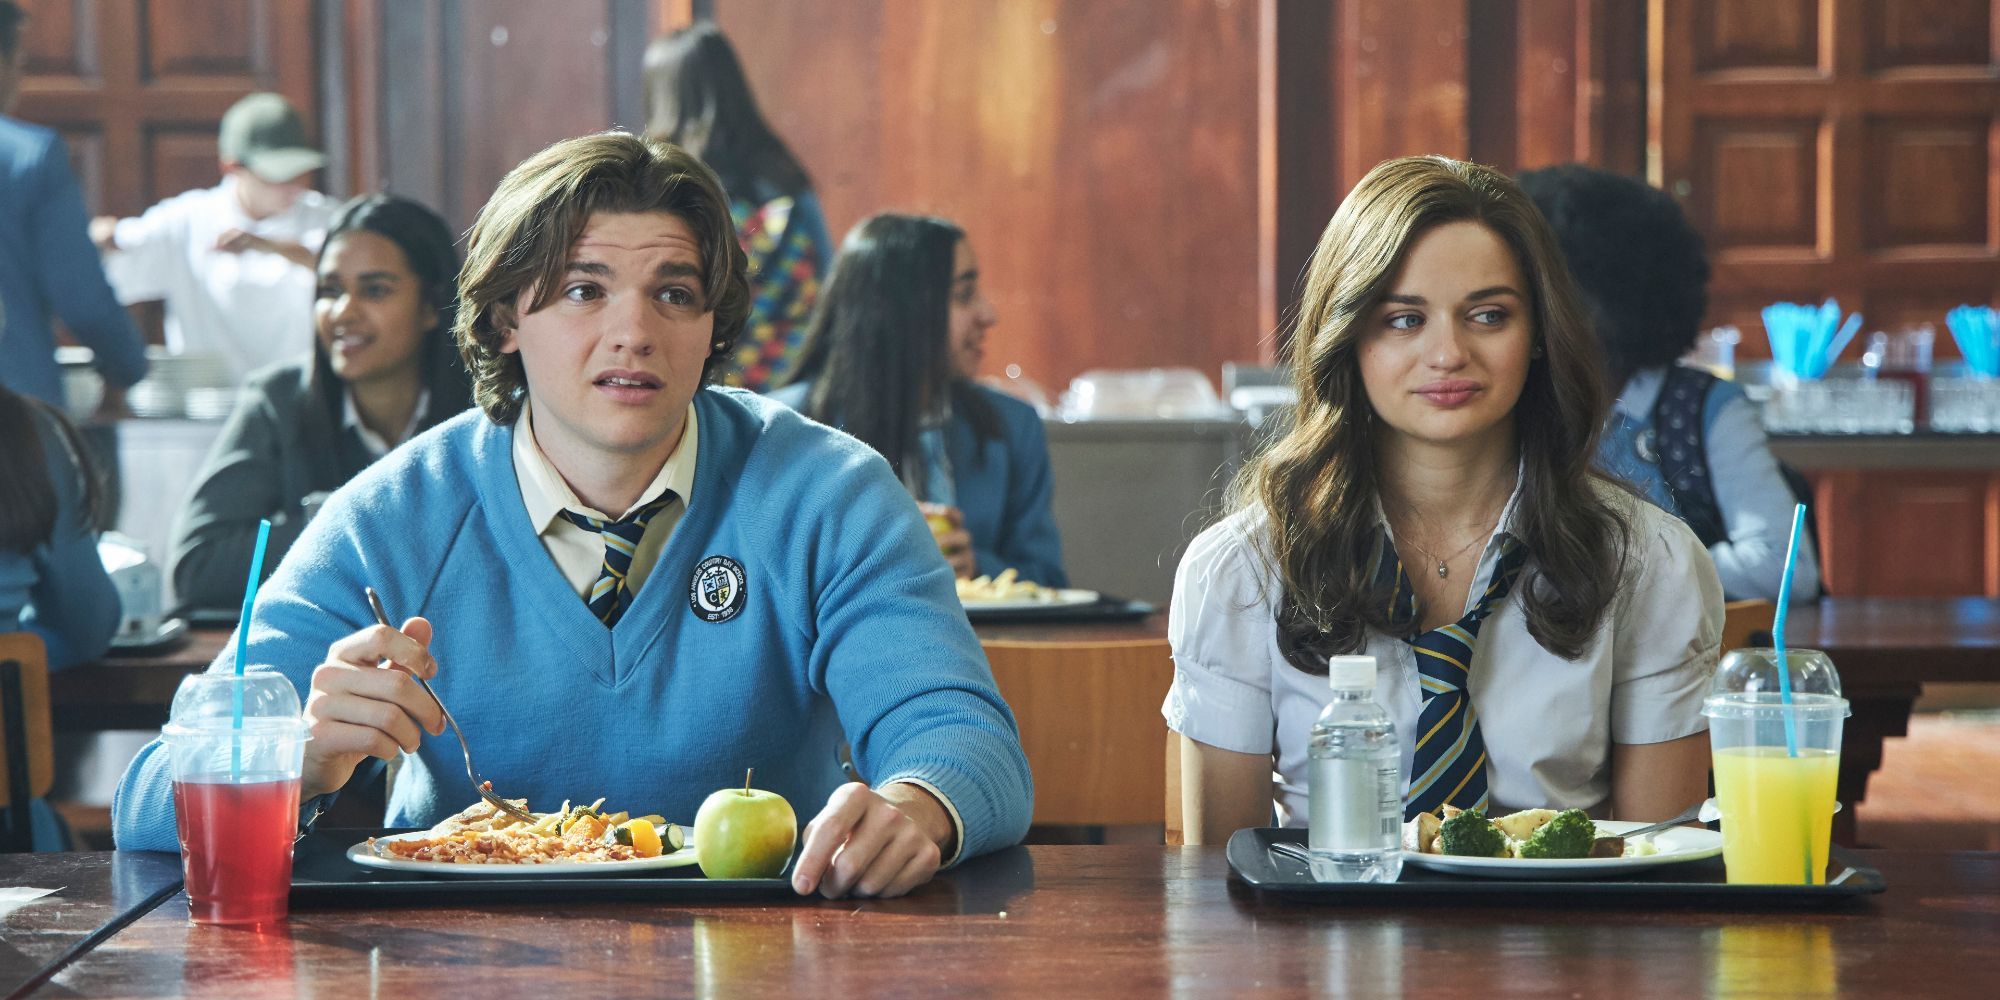 Joel Courtney and Joey King in The Kissing Booth 2